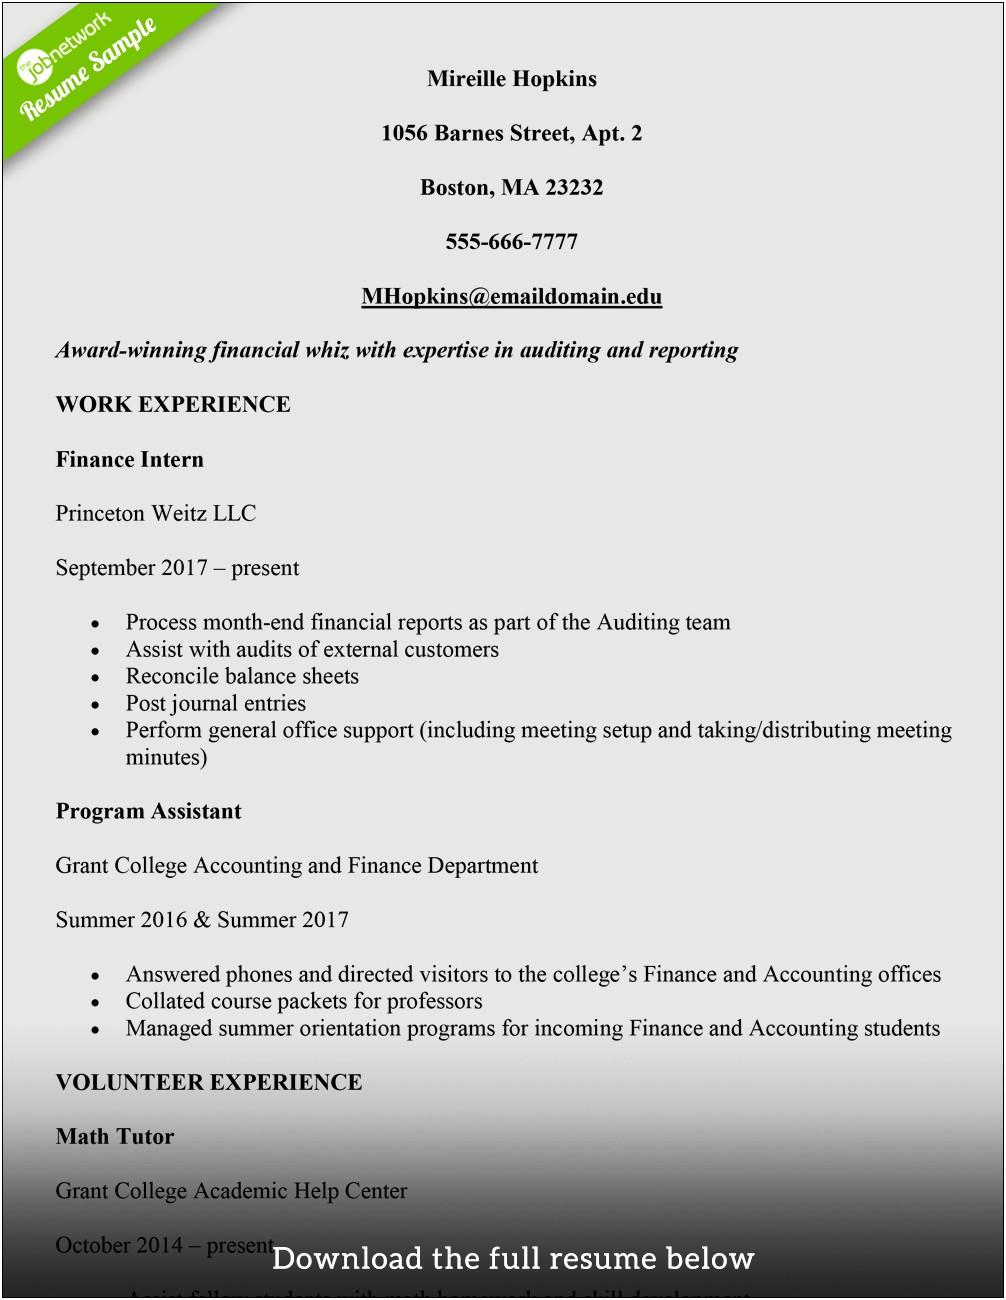 Resume Headers For Internships And Work